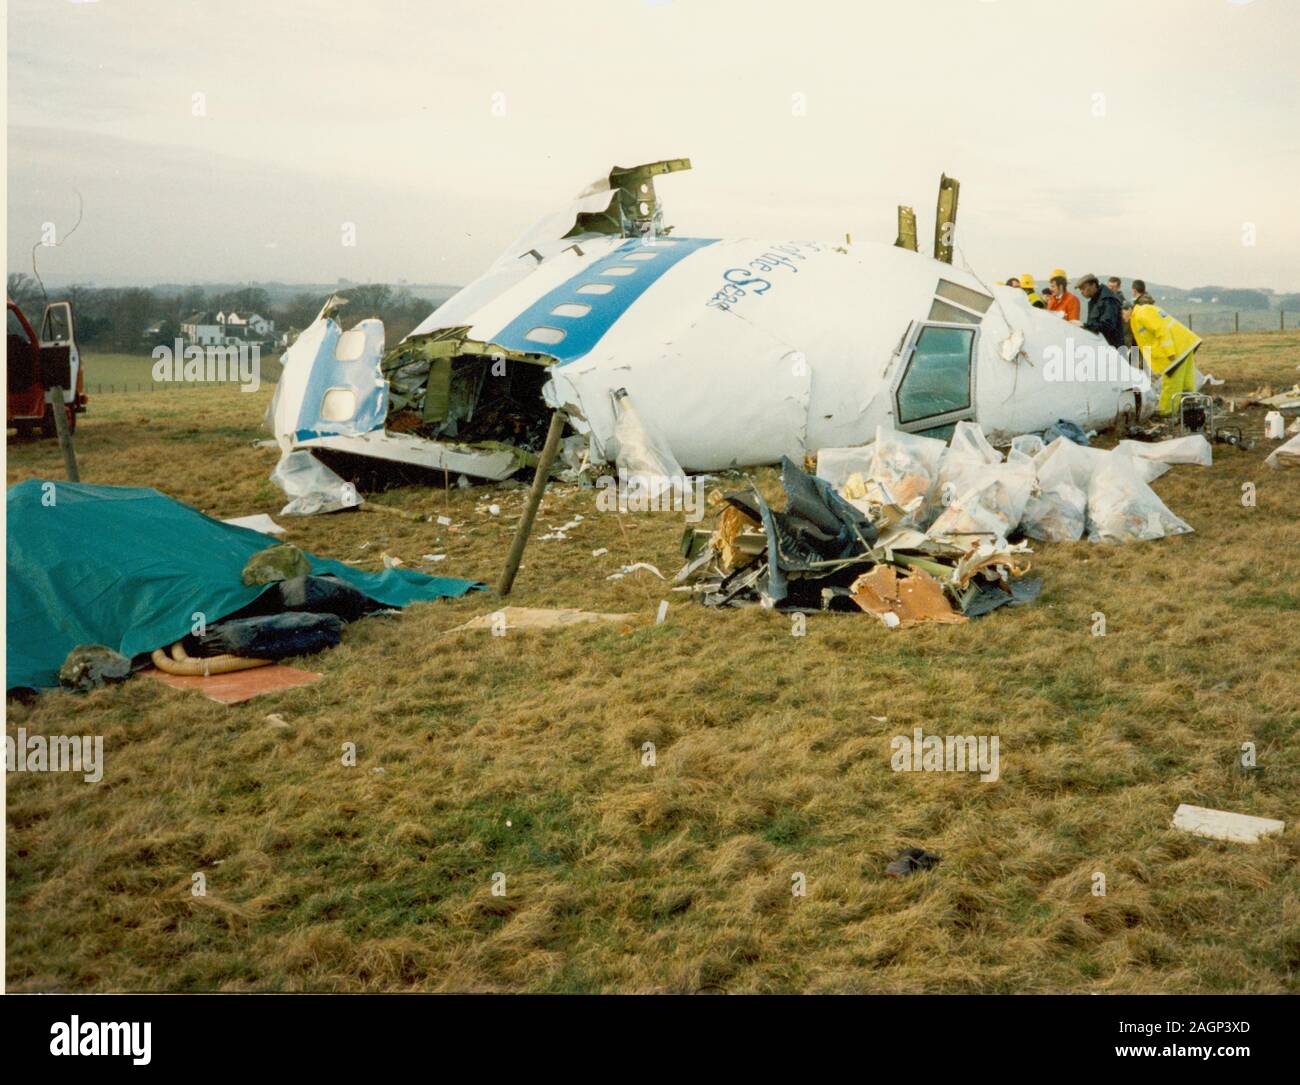 Pan Am Flight 103 Wreckage. Pan Am Flight 103 was a regularly scheduled Pan Am transatlantic flight from Frankfurt to Detroit via London and New York. On 21 December 1988, N739PA, the aircraft operating the transatlantic leg of the route was destroyed by a bomb, killing all 243 passengers and 16 crew in what became known as the Lockerbie bombing. Large sections of the aircraft crashed onto a residential street in Lockerbie, Scotland, killing 11 people on the ground. With a total of 270 people killed, it is the deadliest terror attack in the history of the United Kingdom. Stock Photo